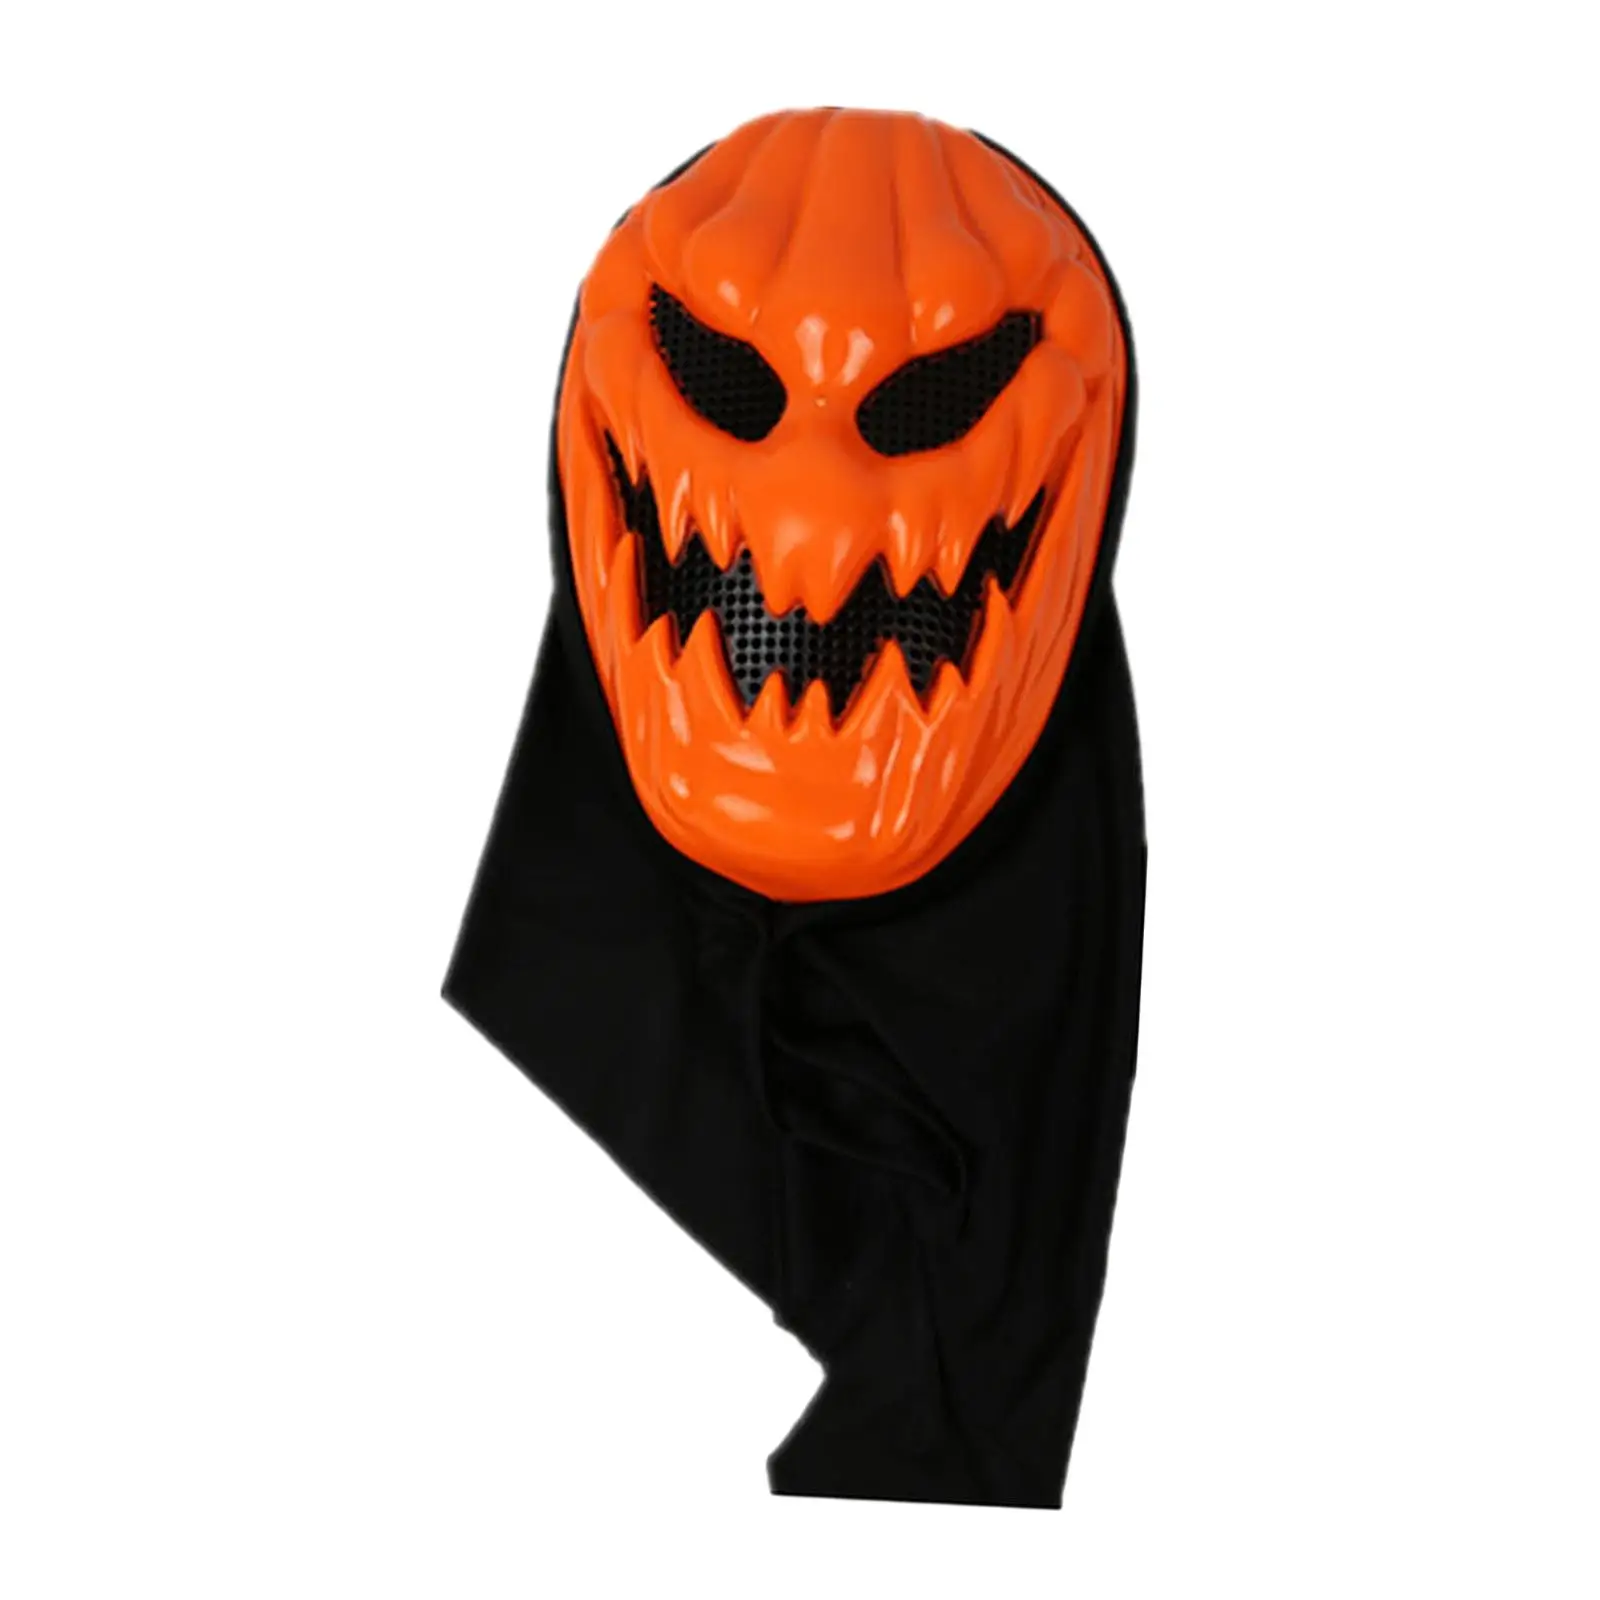 Halloween Pumpkin Head Mask Props Full Face Cover Headgear Costume Party Accessories for Show Cosplay Party Masquerade Festival